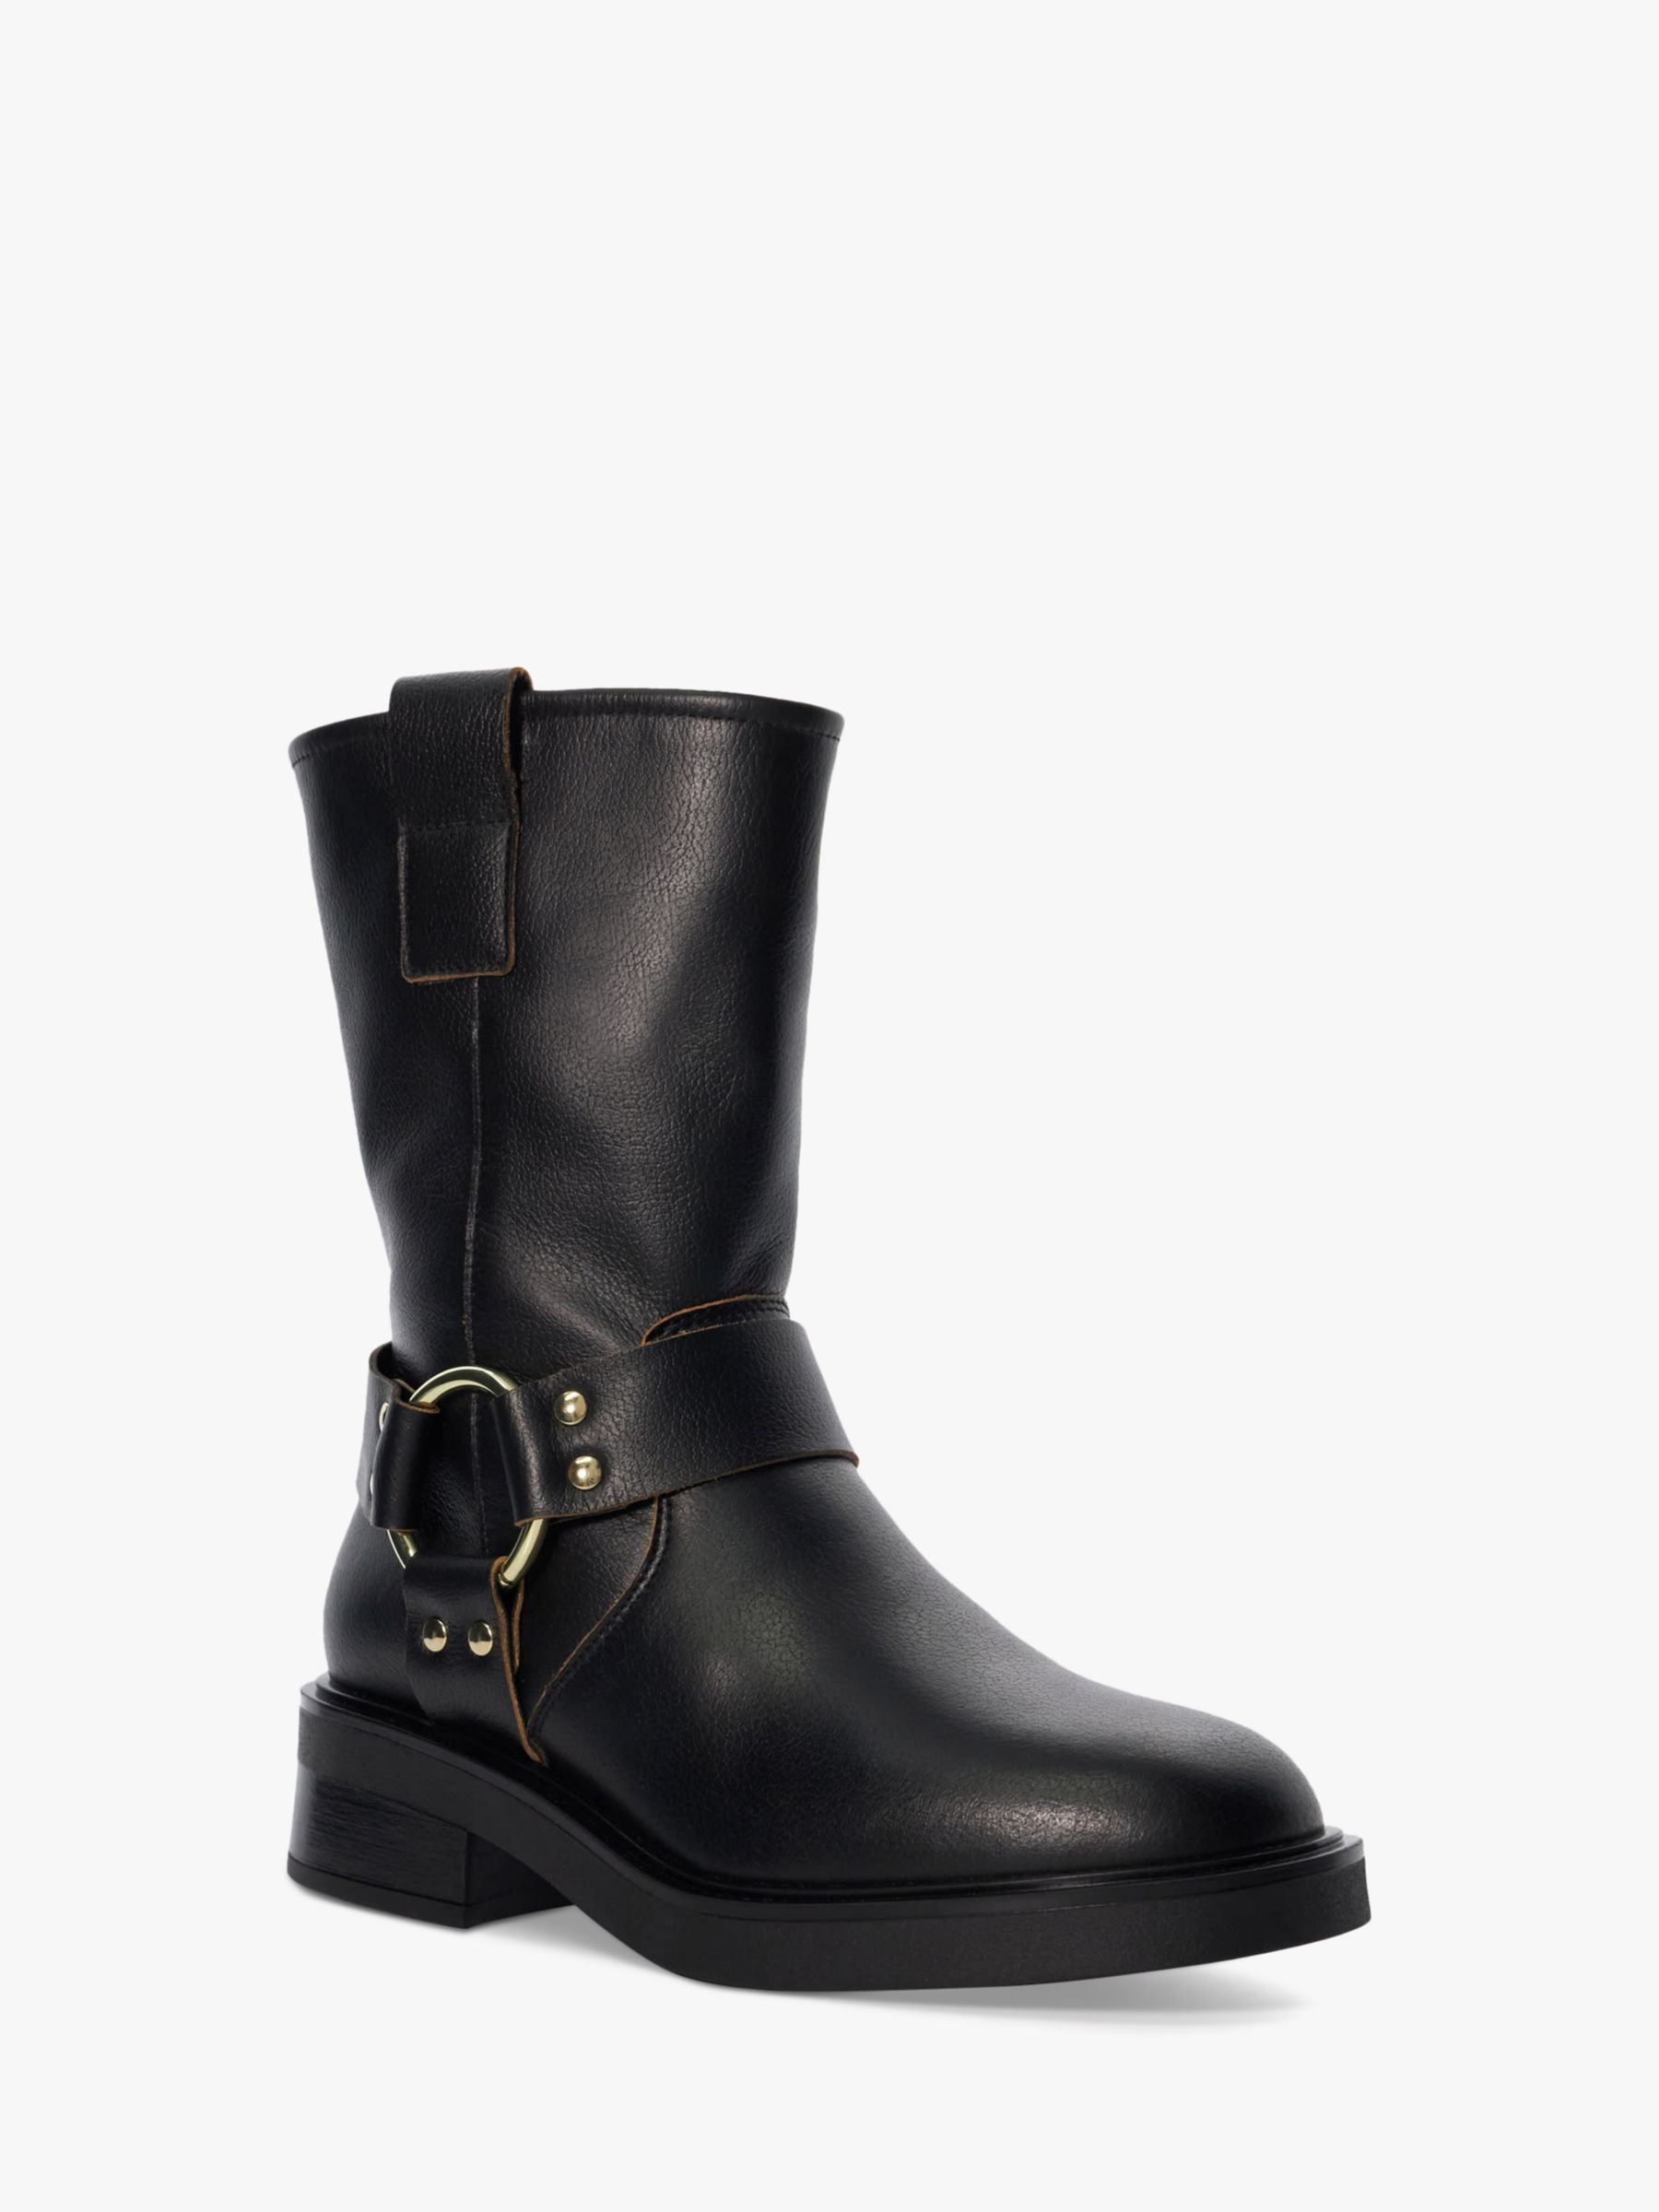 Buy Dune Pally Leather Low Biker Boots, Black Online at johnlewis.com